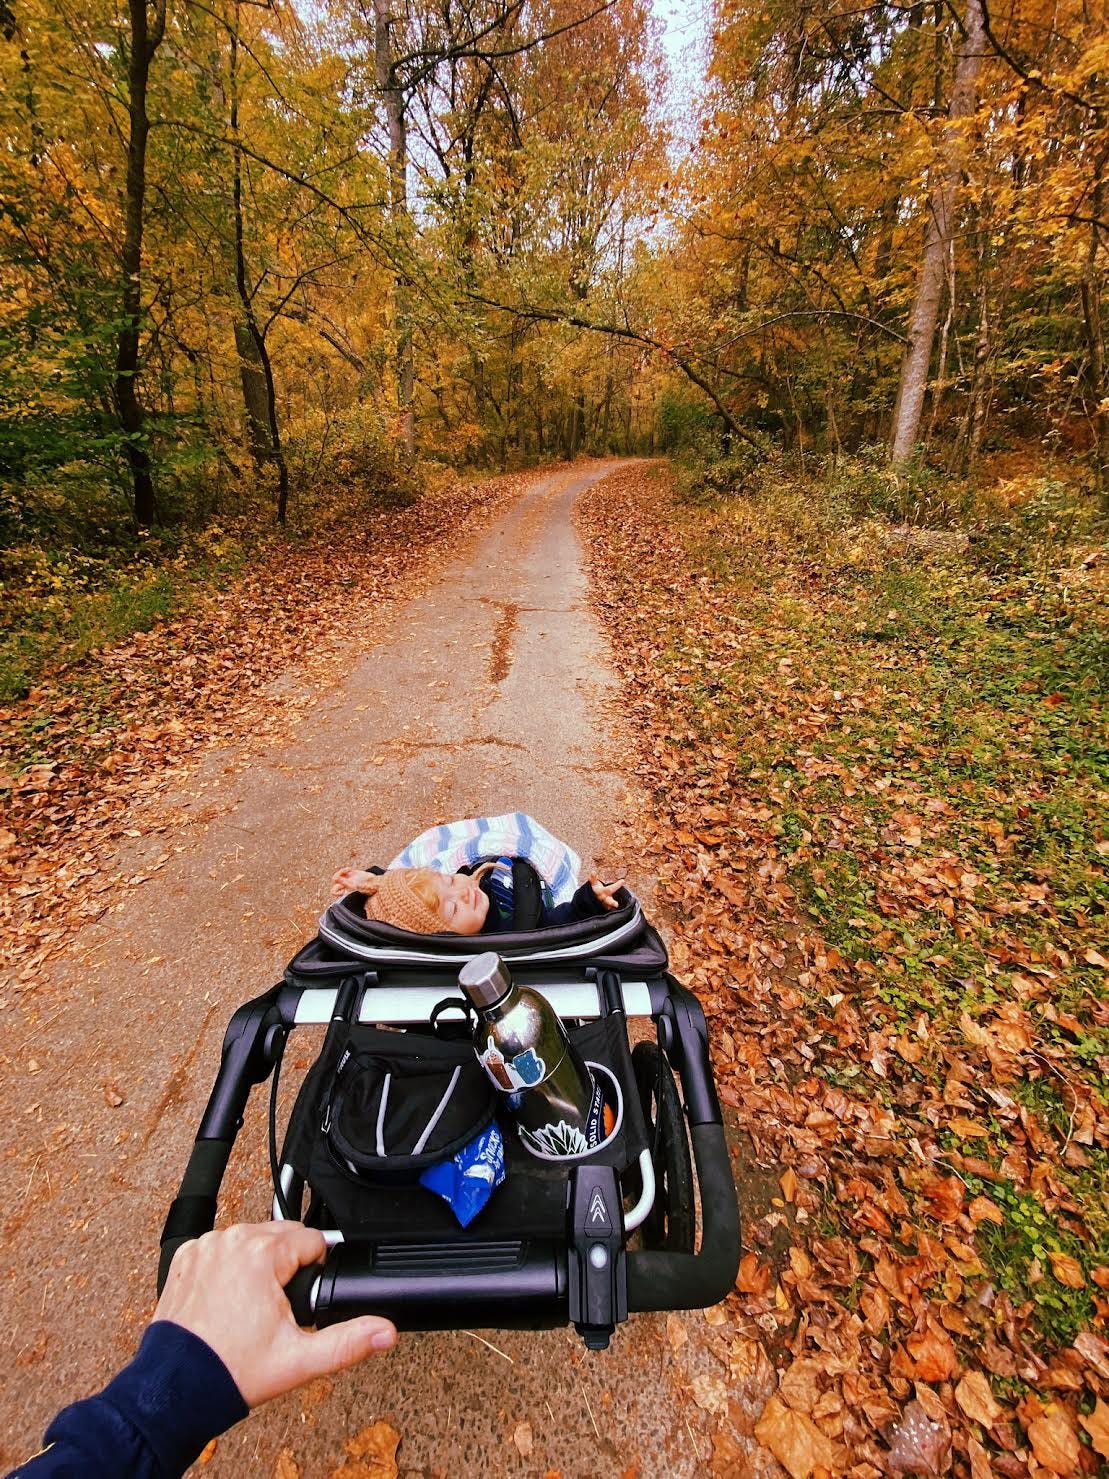 paved path cutting through woods of fall foliage, black stroller with baby looking up, closed eyes at runner who's hand is on pushing the stroller